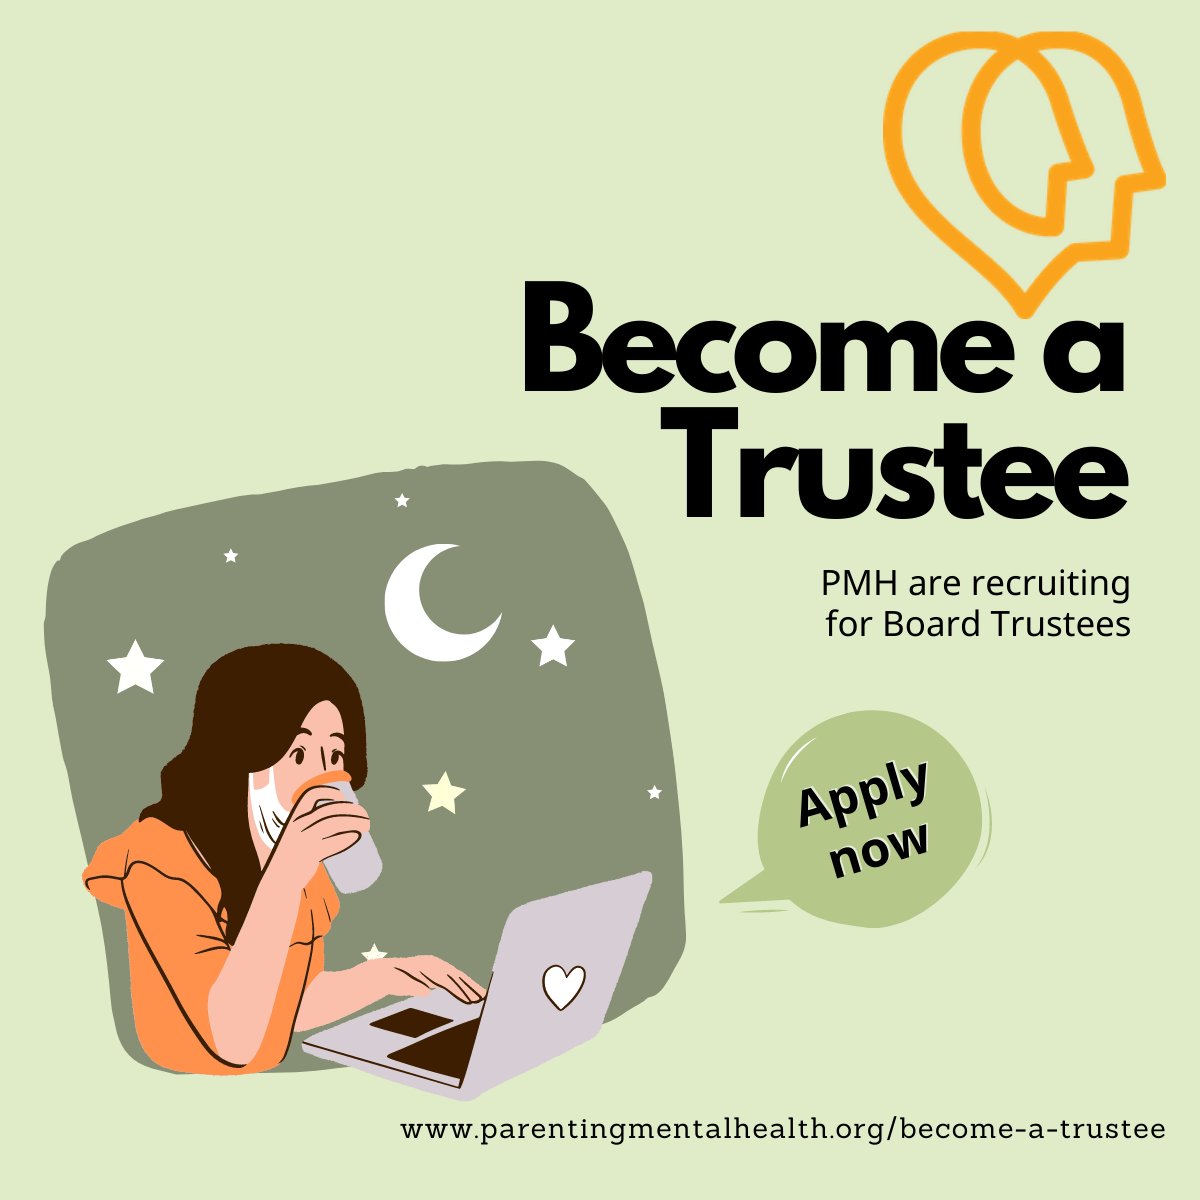 We are recruiting for Board Trustees: We are looking for individuals with professional or lived experience of the support families need when a child has mental health difficulties, alongside experience in charity or business sectors.
parentingmentalhealth.org/become-a-trust… #TrusteeRecruitment